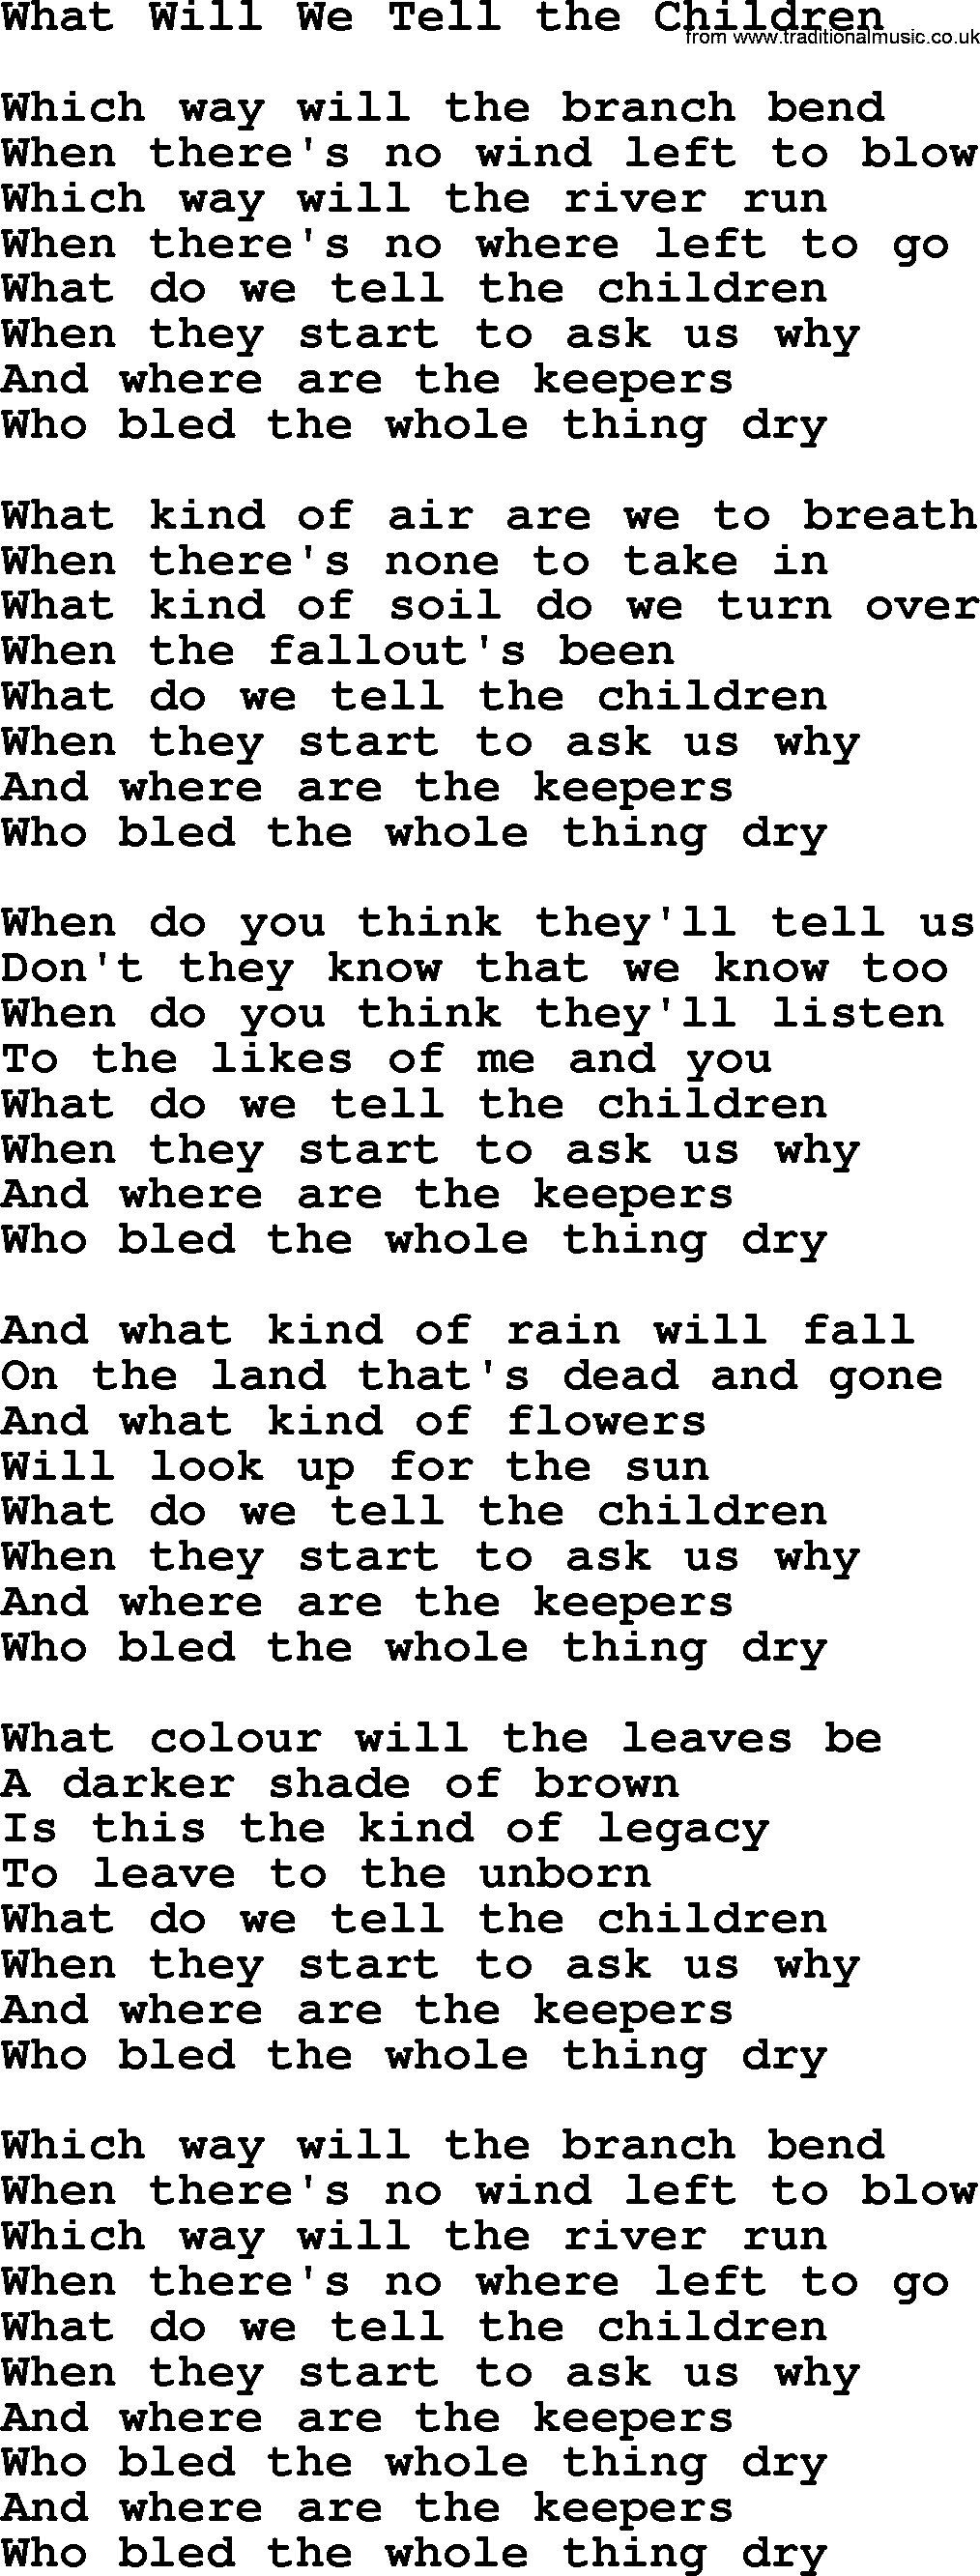 The Dubliners song: What Will We Tell The Children, lyrics